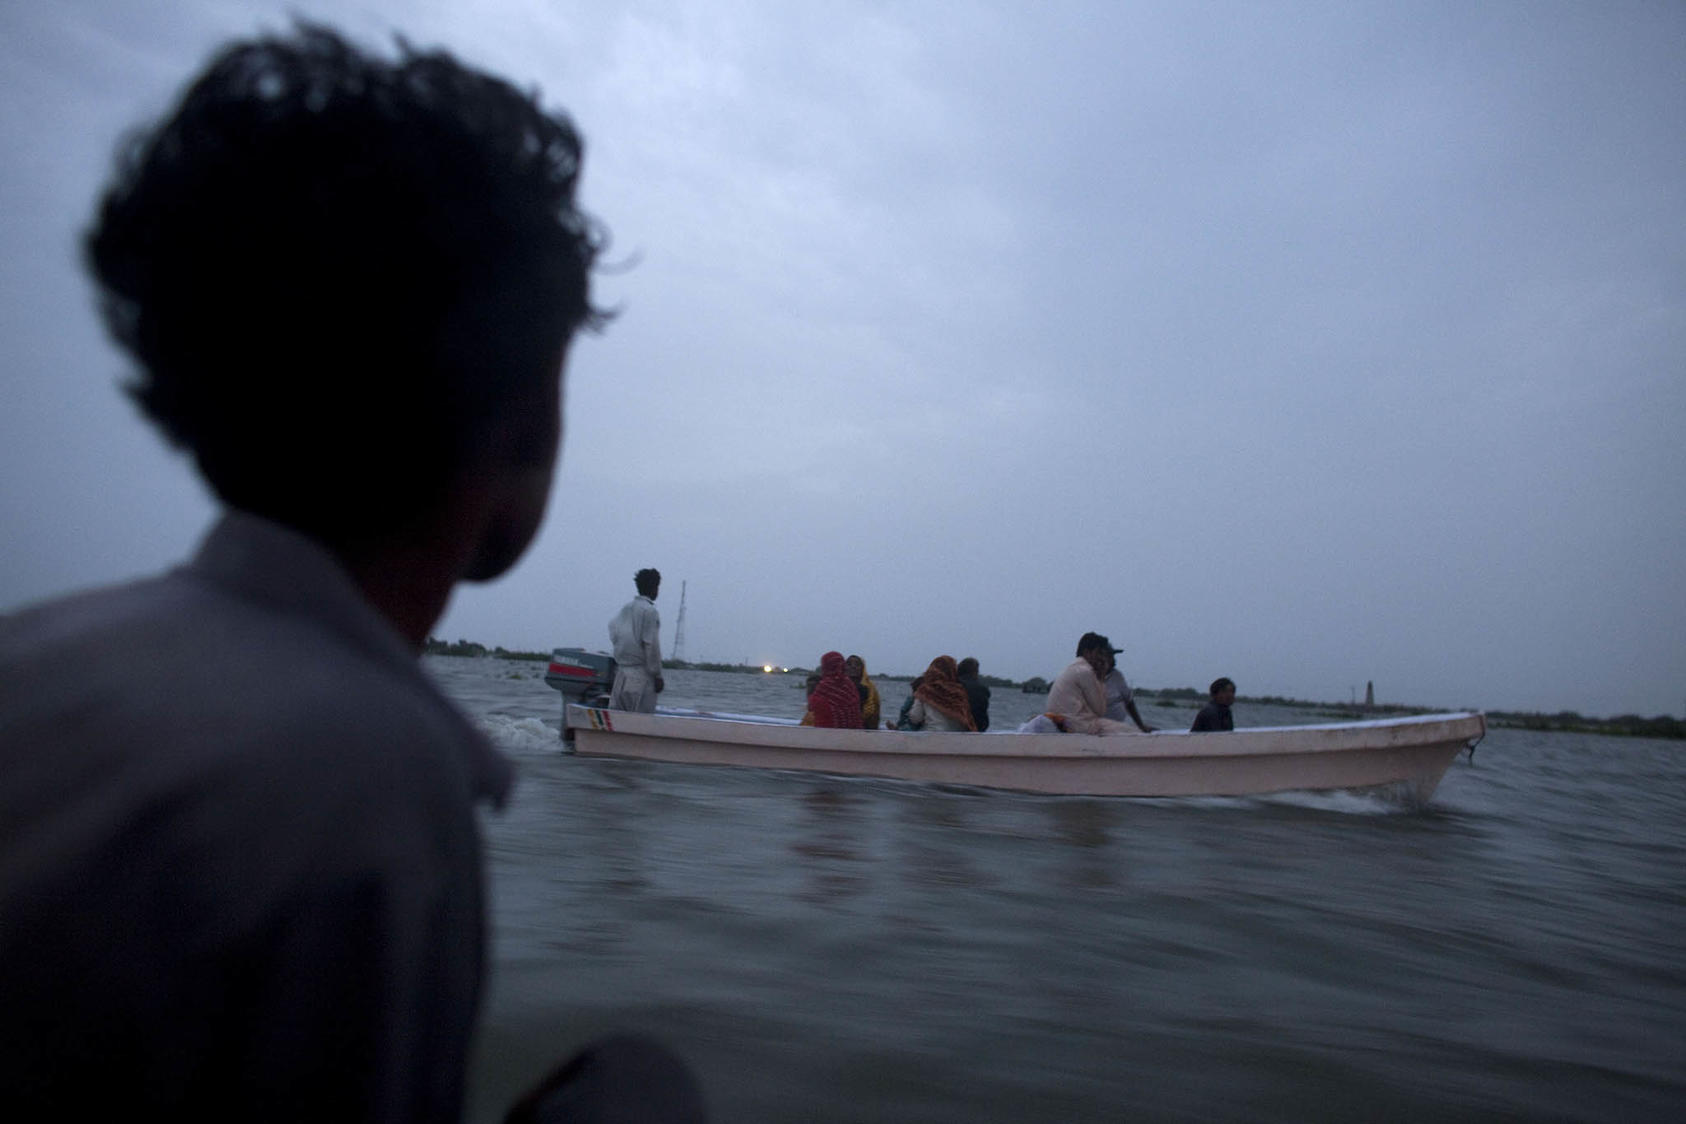 Rescue boats take displaced people to the area of Thatta, where thousands took refuge, in a small village next to Sujawal, Pakistan, Aug. 30, 2010. (Tyler Hicks/The New York Times)